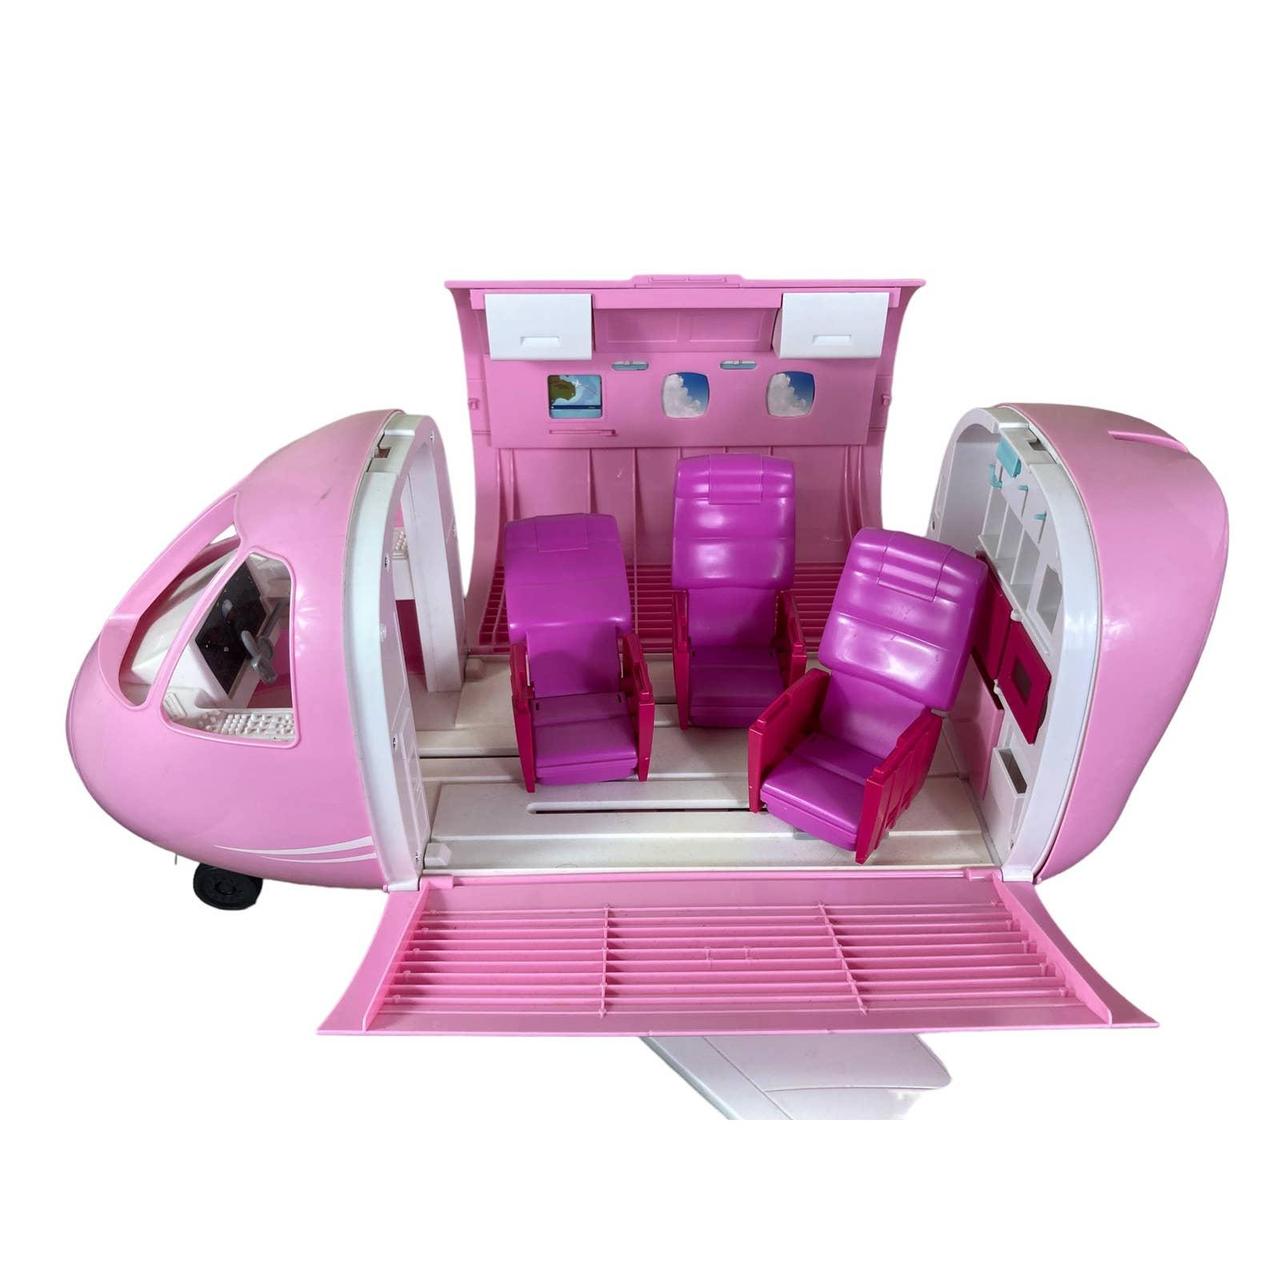 Toy Review  Barbie Dream Plane from Mattel 